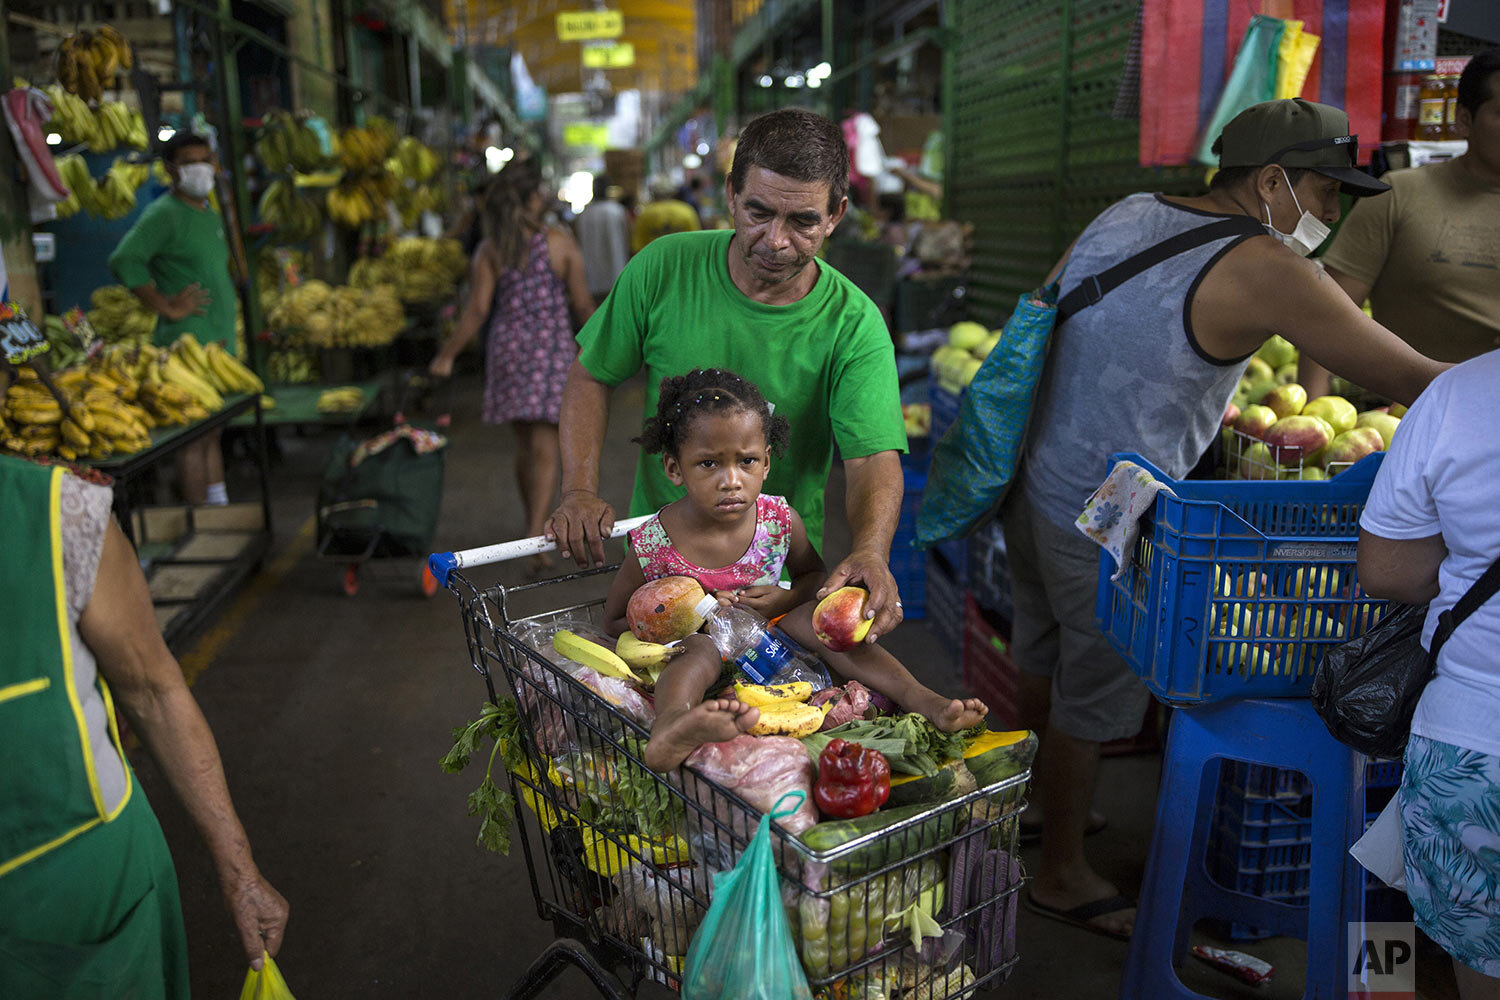  In this March 18, 2020 photo, Cesar Alegre, accompanied by his 4-year-old daughter Lia, places a damaged apple in his shopping cart filled with discarded produce given to him by vendors at a popular market in Lima, Peru.  (AP Photo/Rodrigo Abd) 